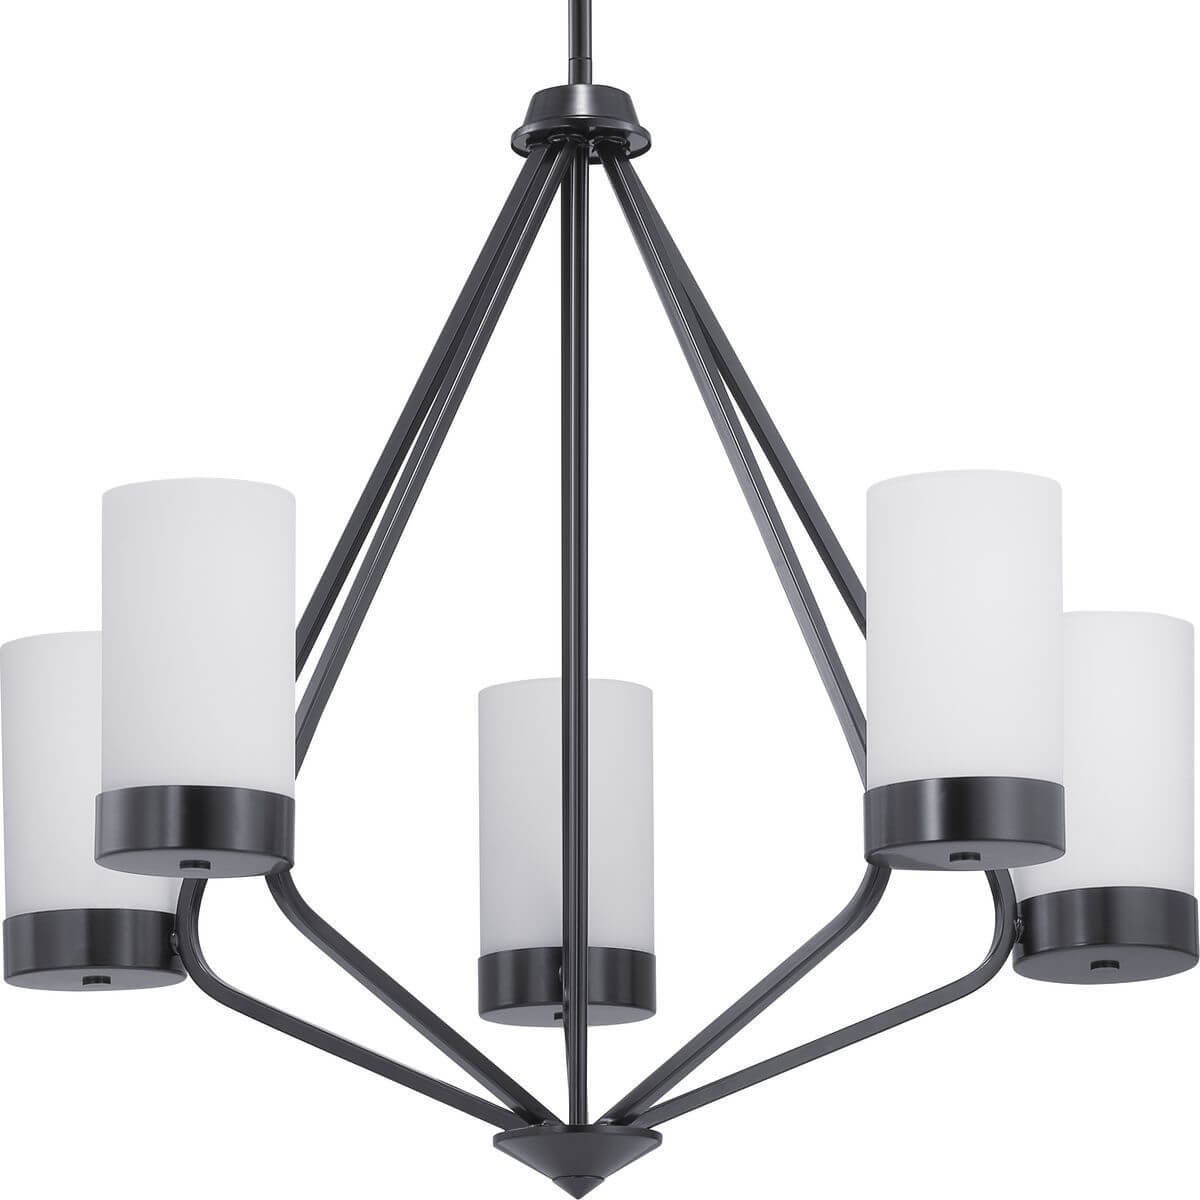 Progress Lighting Elevate 5 Light 27 Inch Chandelier in Black with Etched White Glass P400022-031